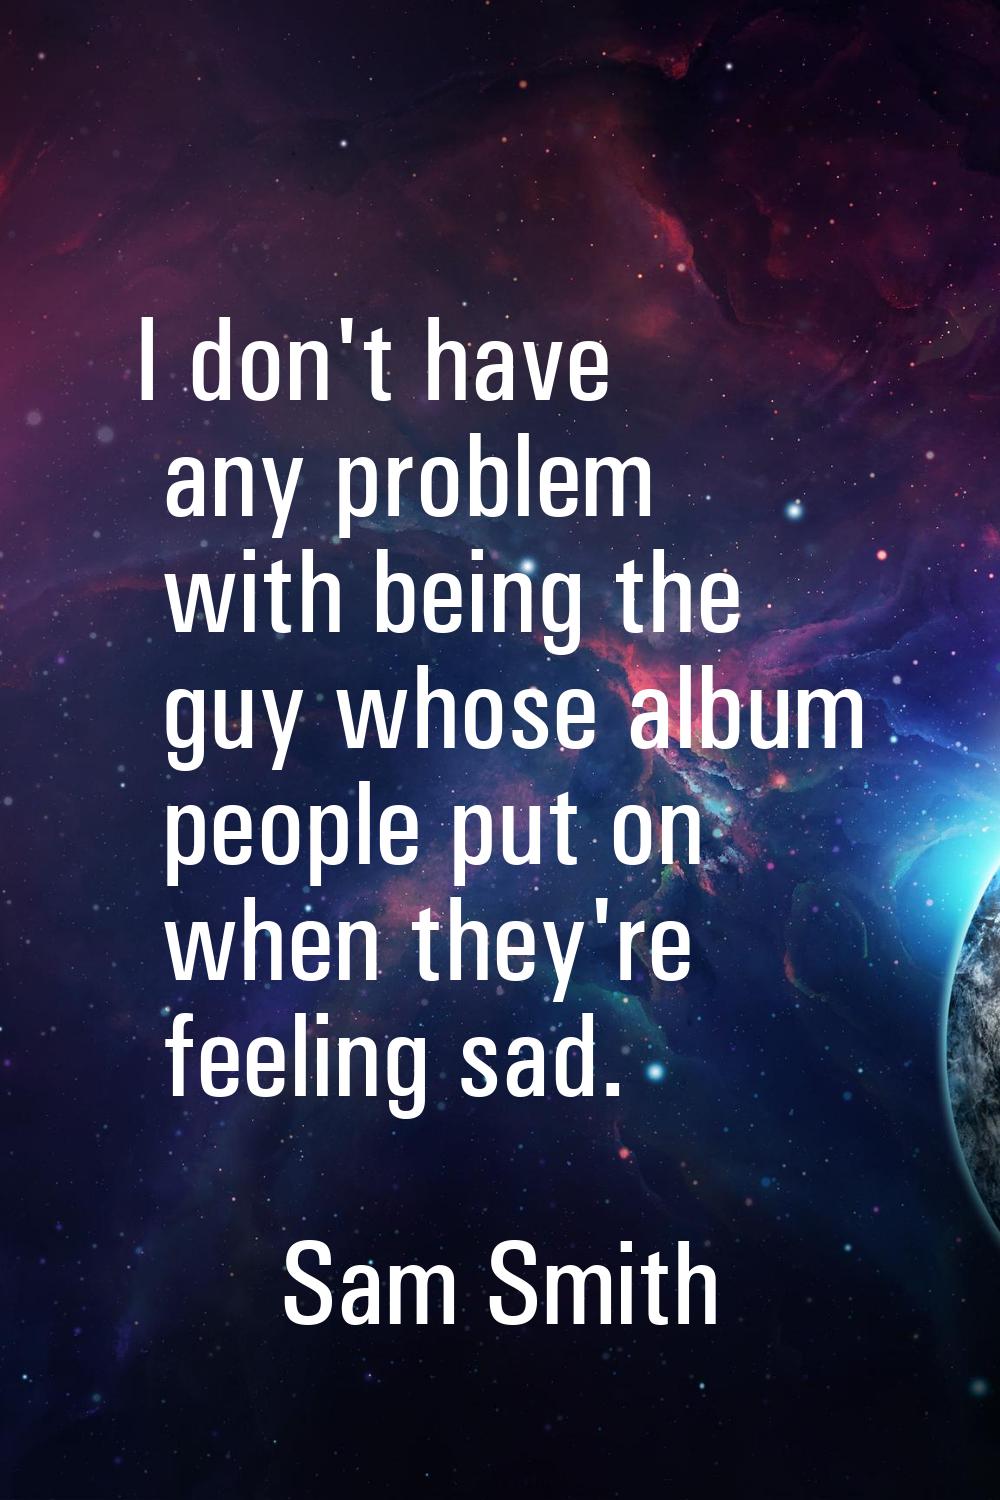 I don't have any problem with being the guy whose album people put on when they're feeling sad.